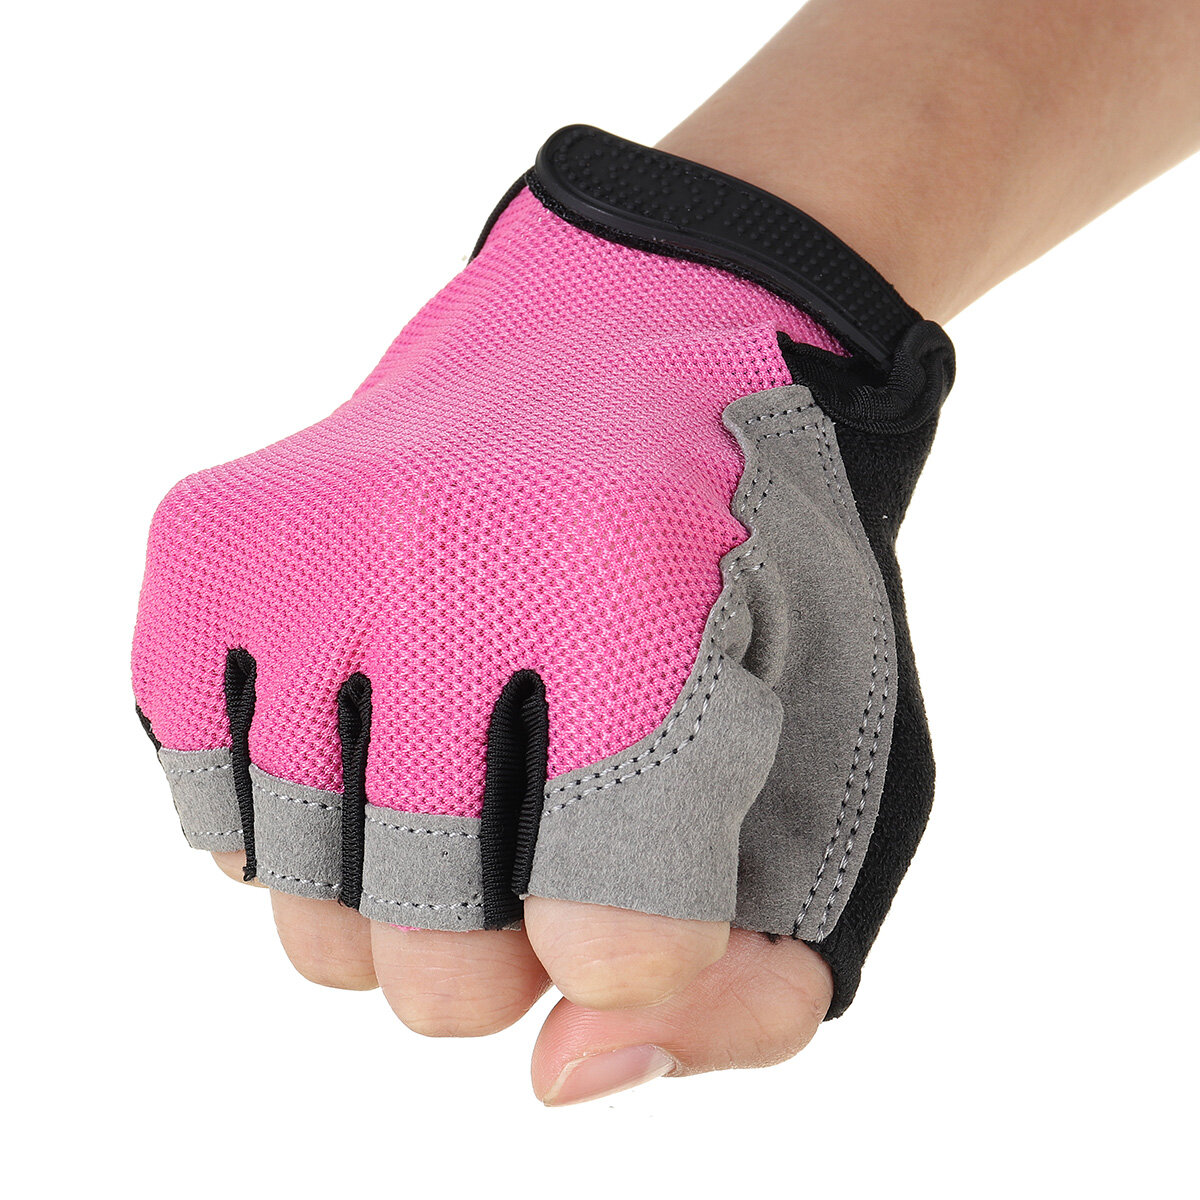 Cycling Fingerless Gloves Women Breathable Anti-Skid Half Finger Gloves Workout Gym Weight...